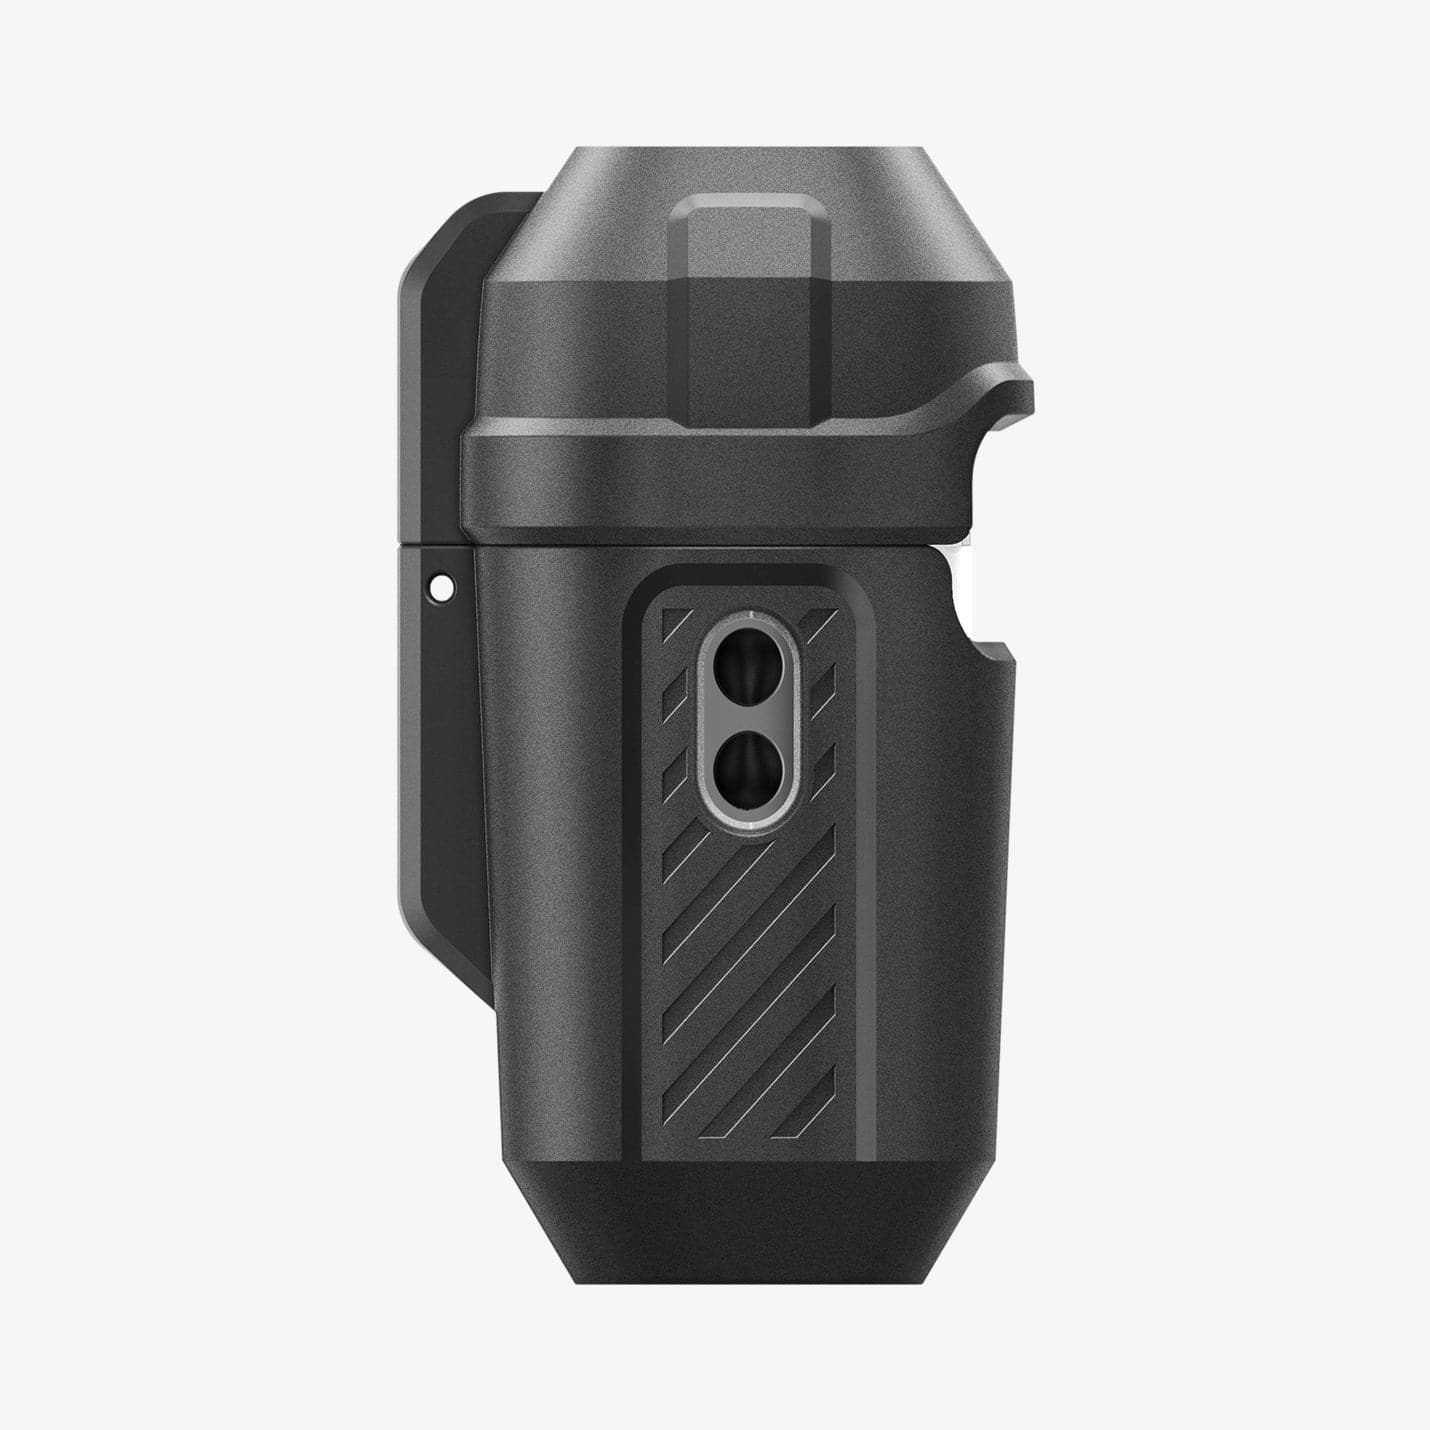 ACS05485 - Apple AirPods Pro 2 Case Lock Fit in matte black showing the side